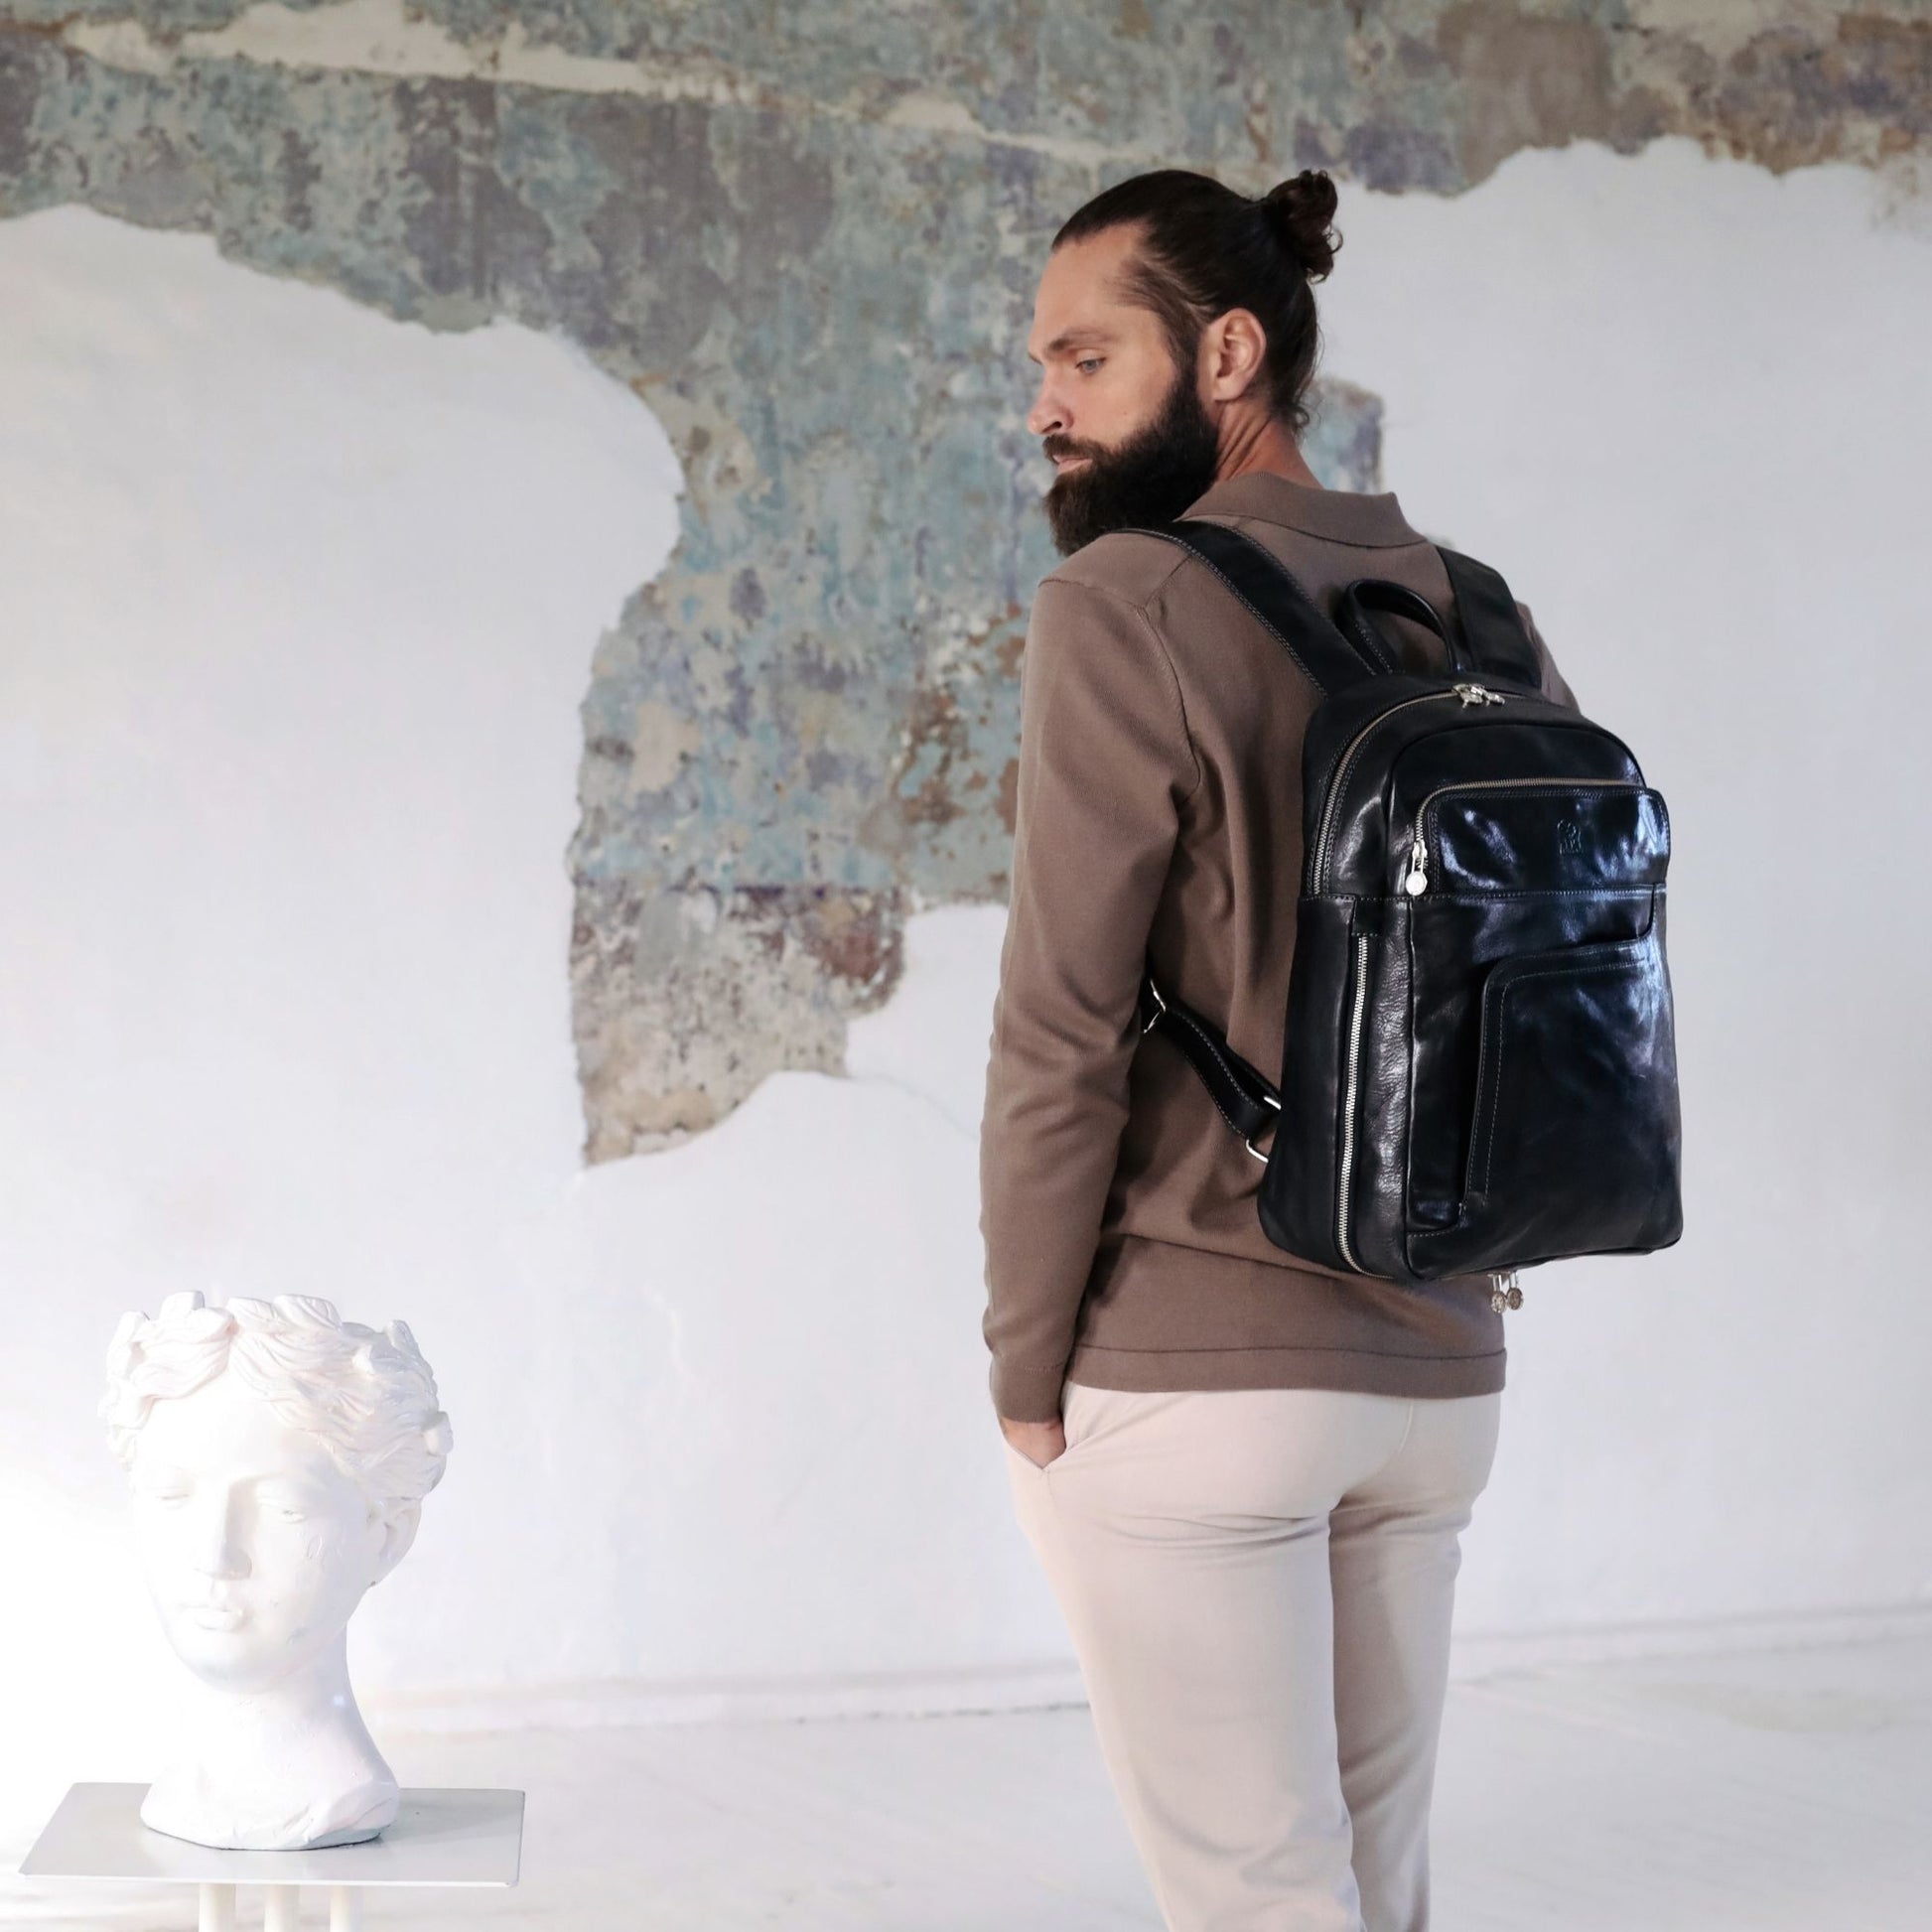 Large Leather Backpack - L.A. Confidential Backpack Time Resistance   